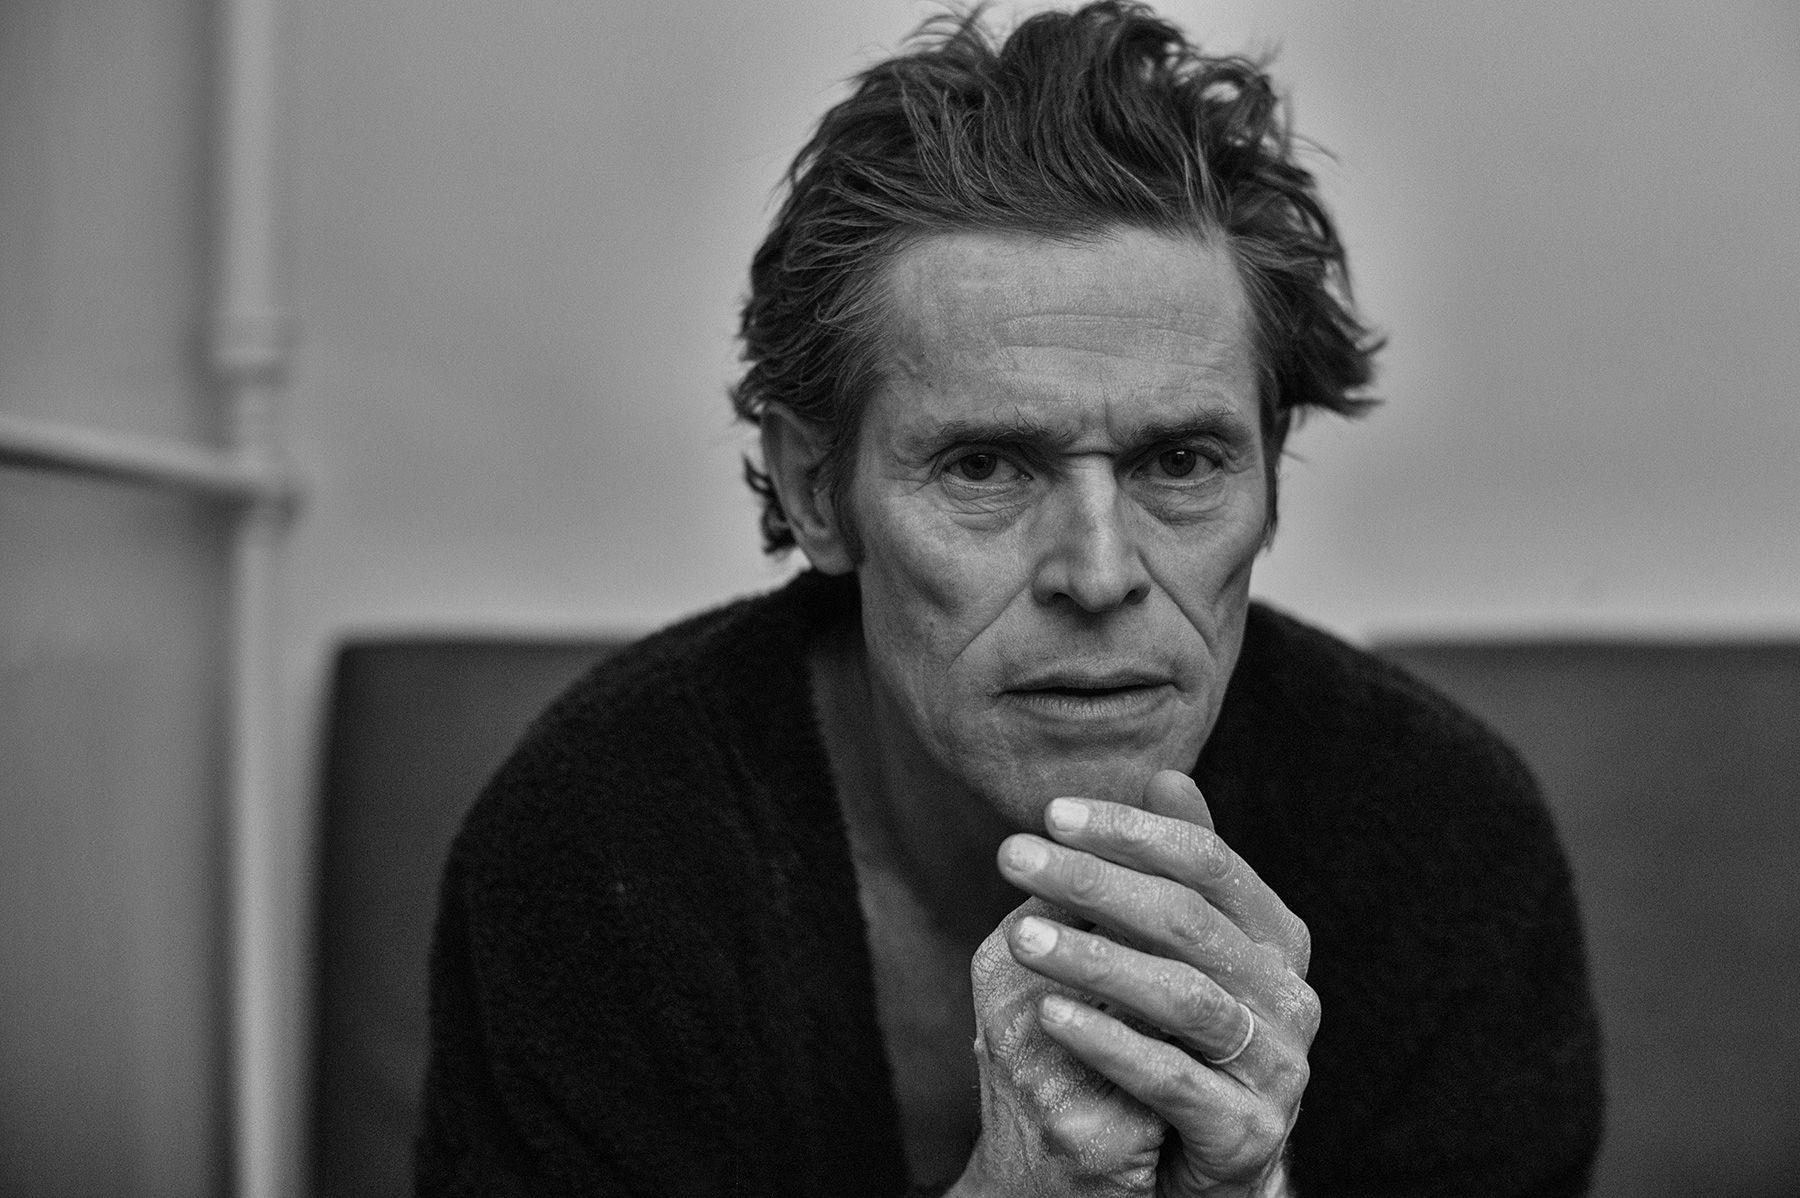 Download 1800x1198 Willem Dafoe, Actor, Black And White, Face